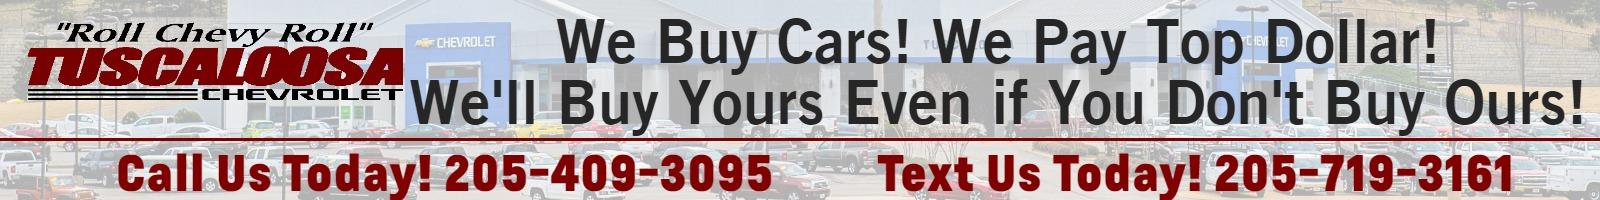 We By Cars! We Pay Top Dollar! We'll Buy Yours Even if You don't Buy ours! Call Us Today! 205-409-3095 Text Us Today! 205-719-3161